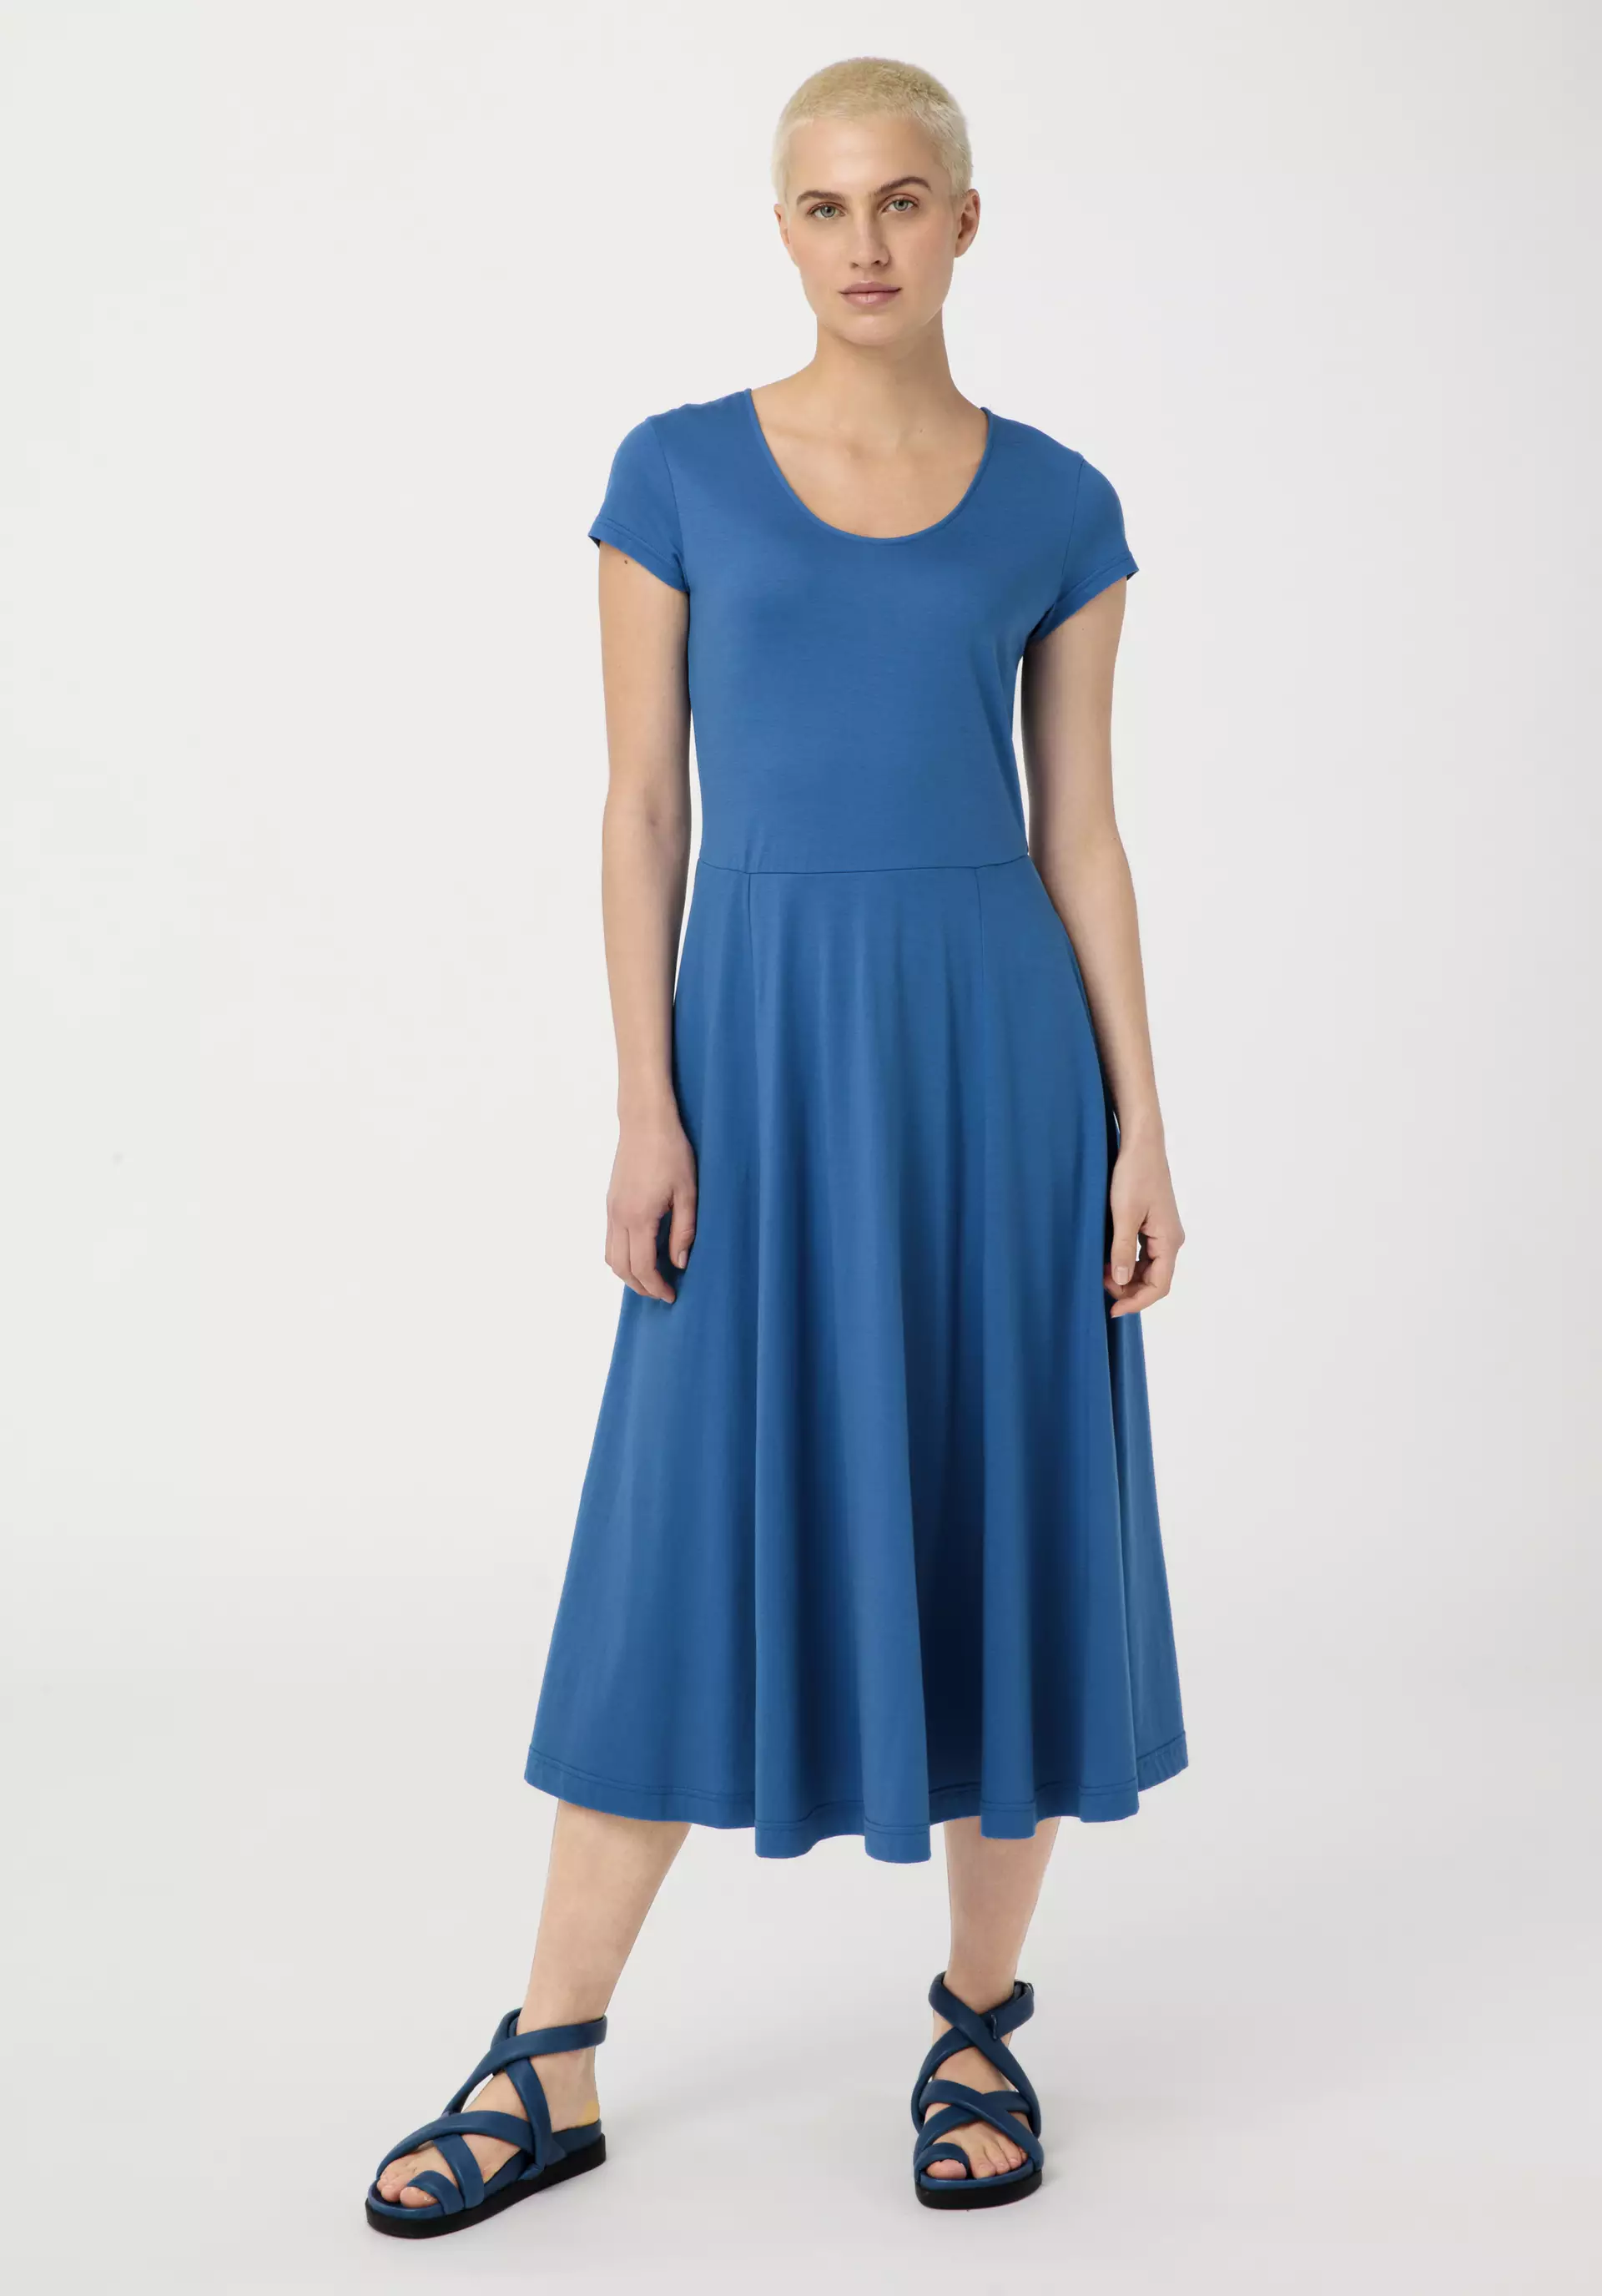 Jersey dress made from pure organic cotton - 0